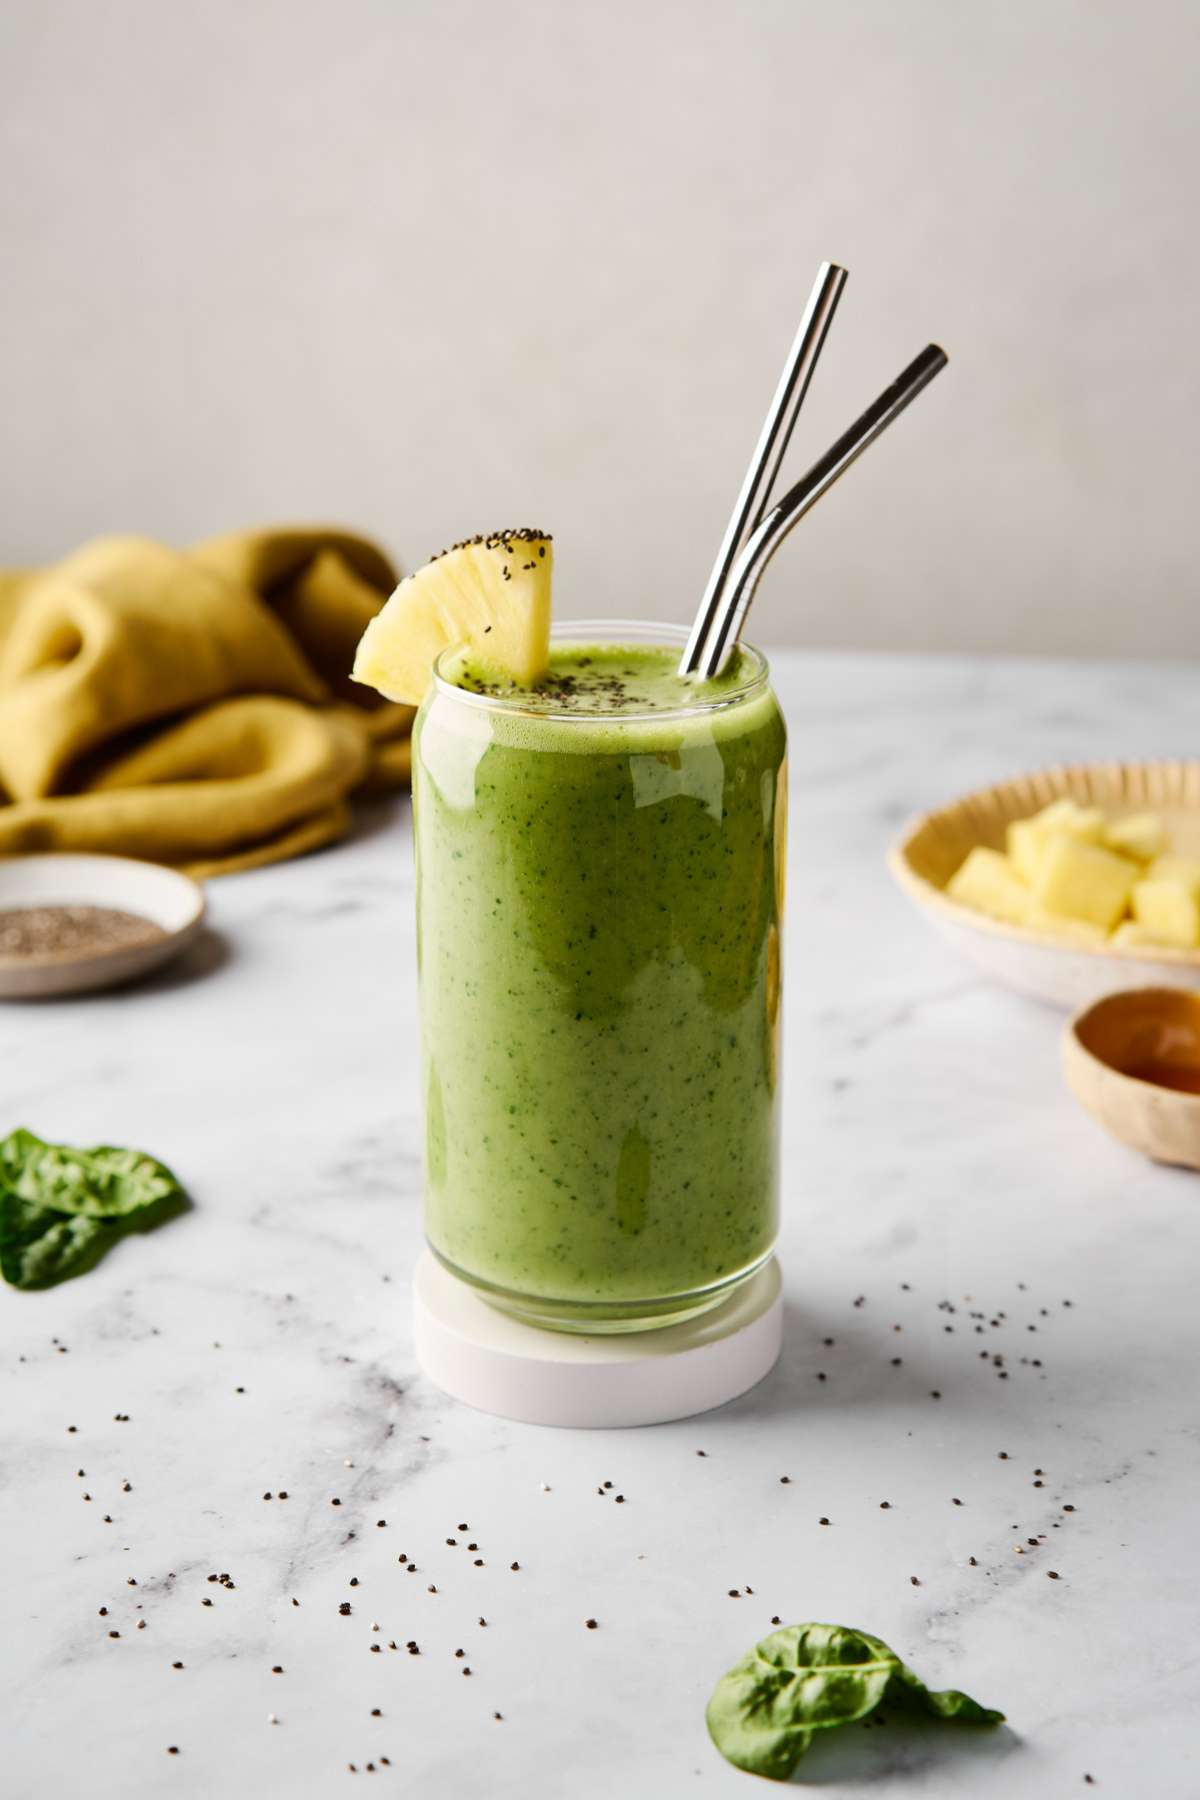 Green smoothie in a glass with two straws and a garnish of a pineapple slice.